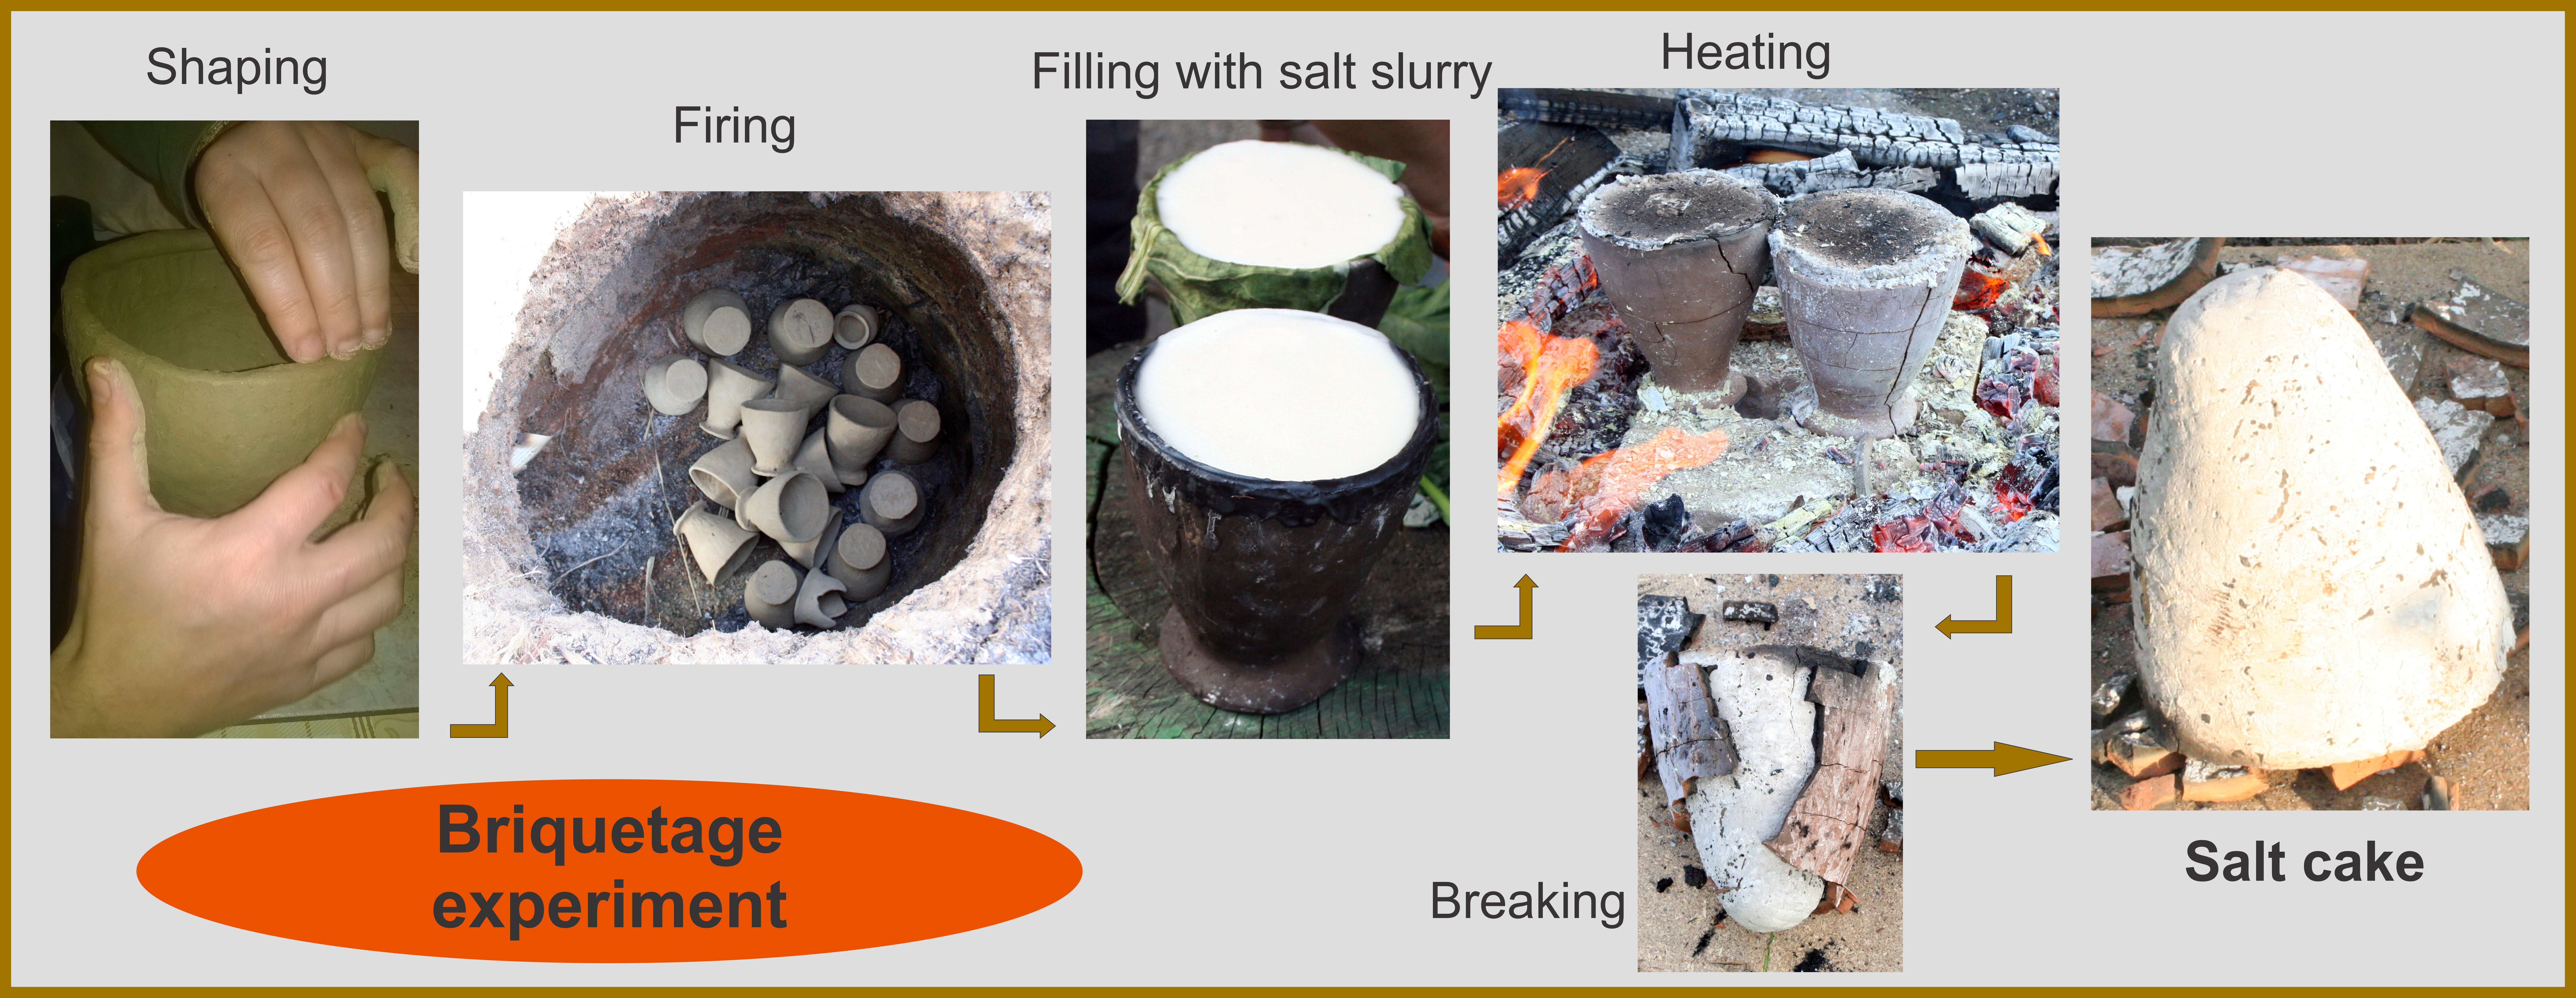 Field experiments concerning the prehistoric production of salt cakes through brine evaporation, using ceramic vessels known as briquetages.